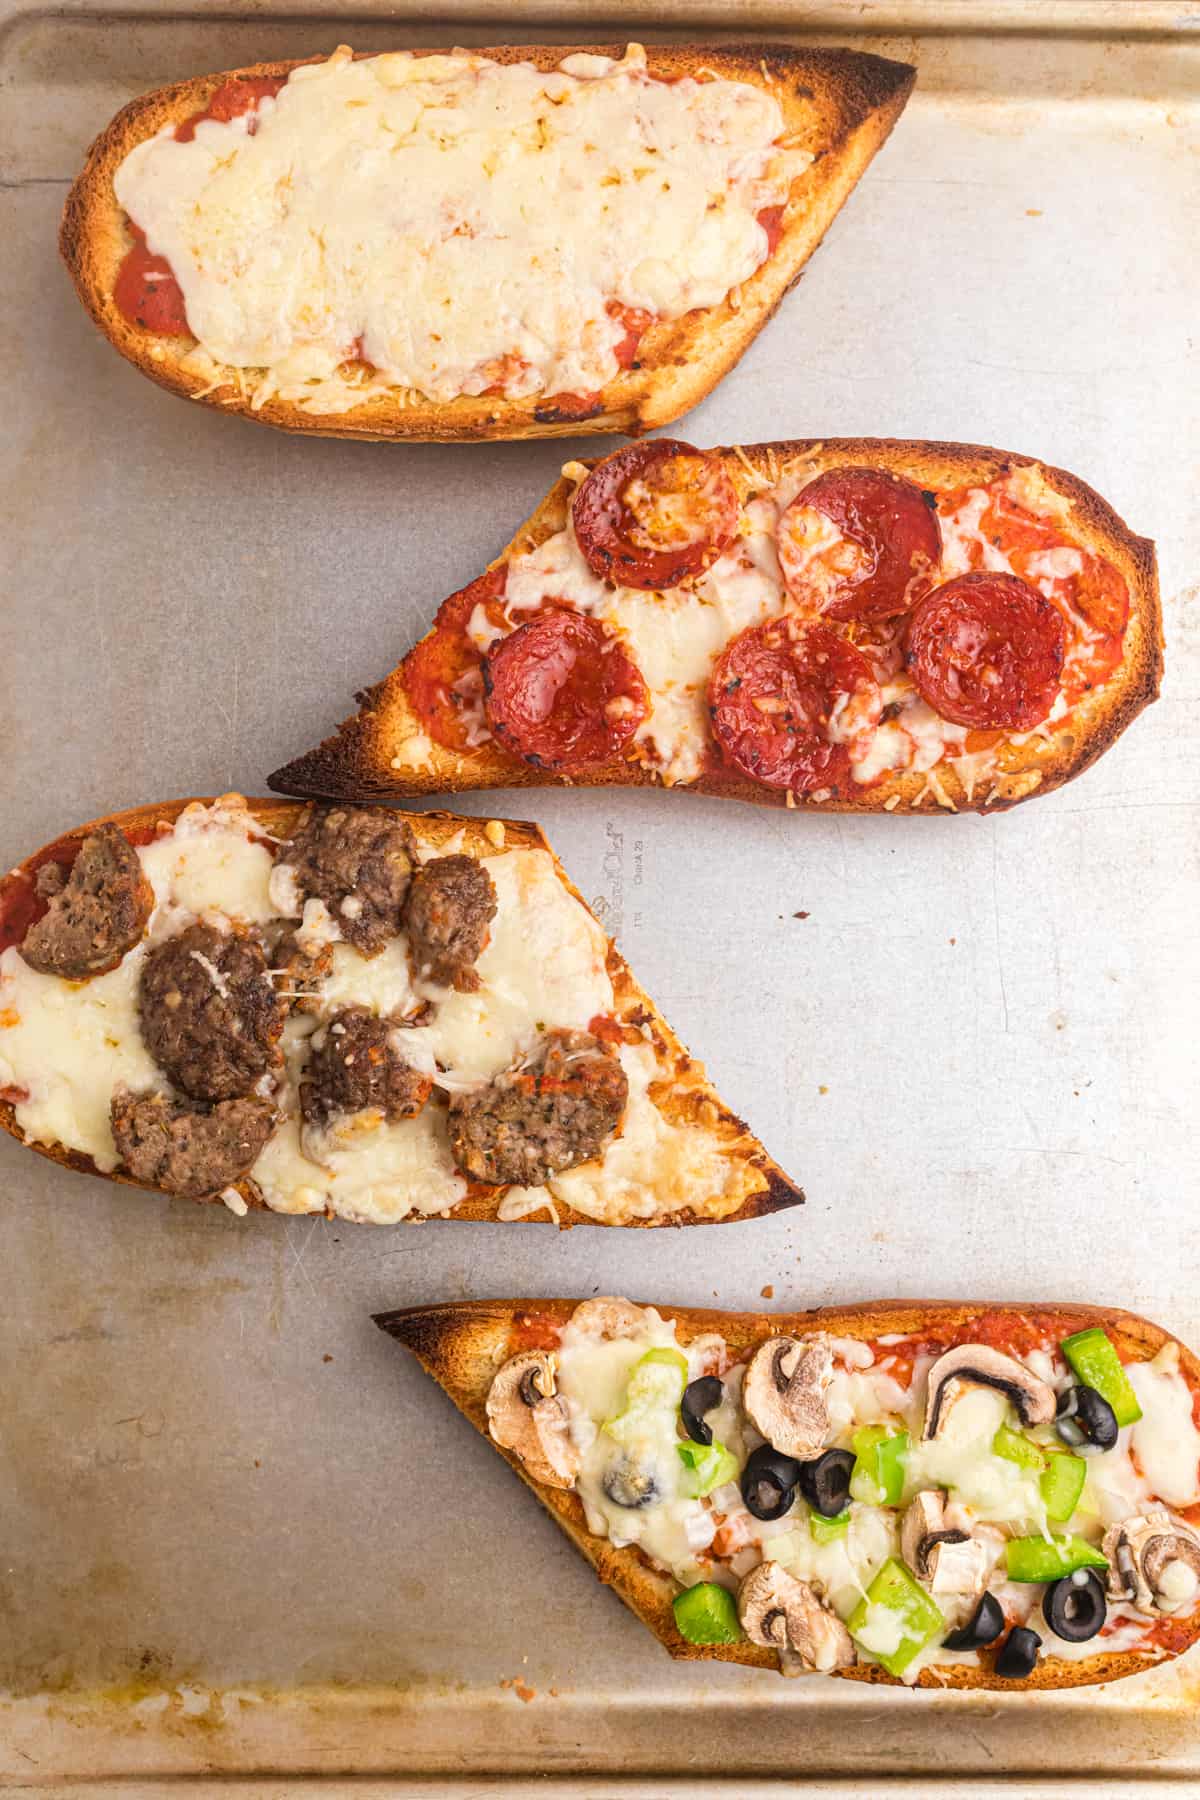 Four slices of cooked french bread pizza are placed on a baking sheet.